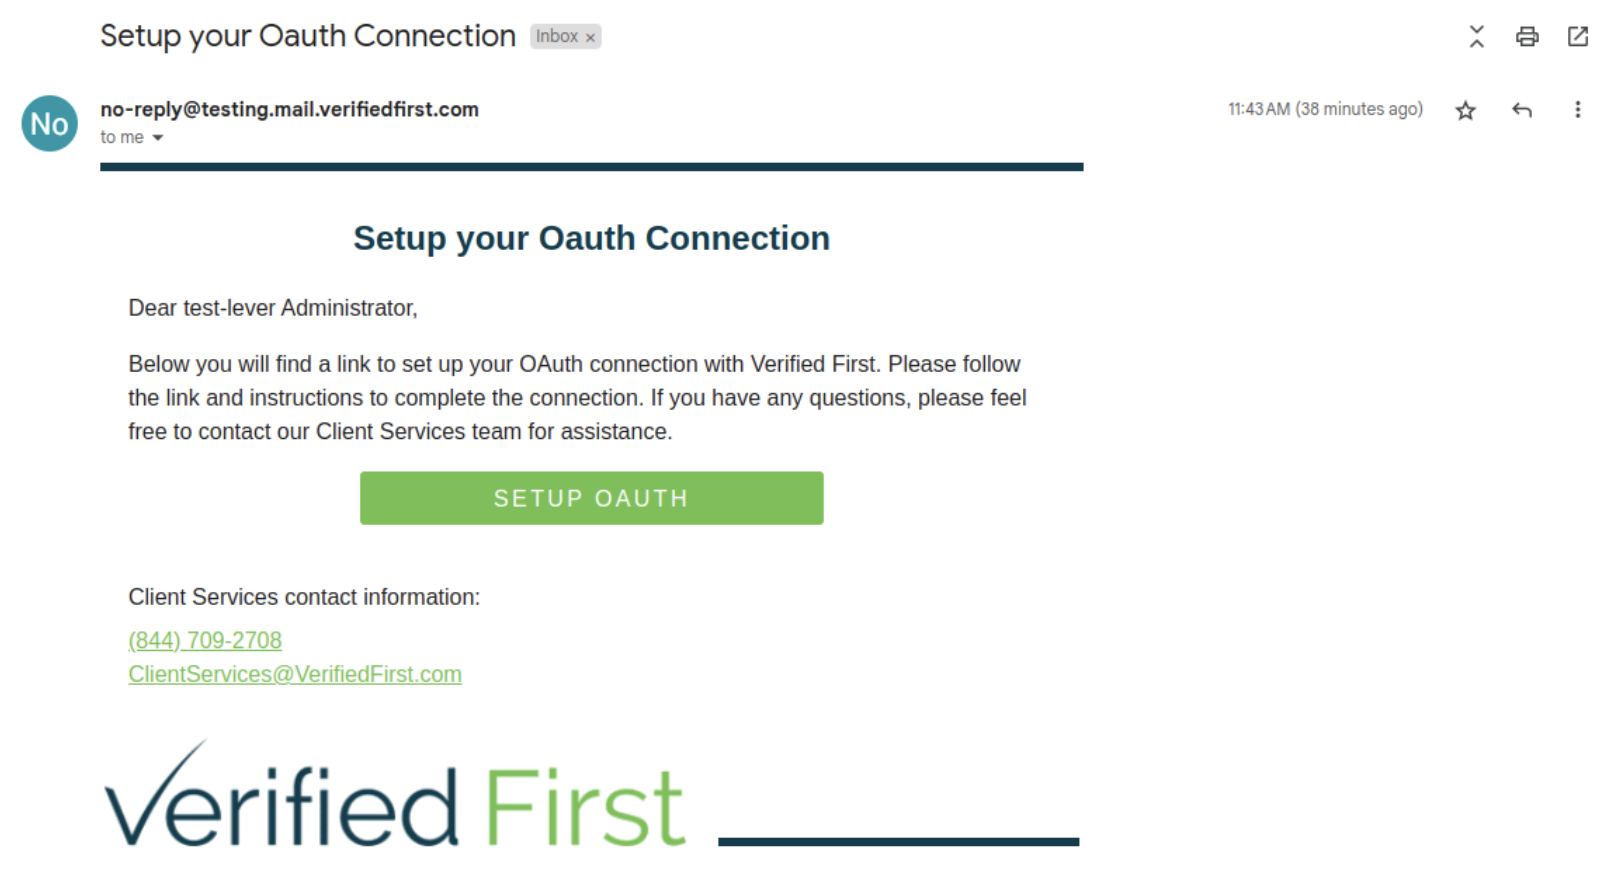 Set up your Oauth connection email from Verified First